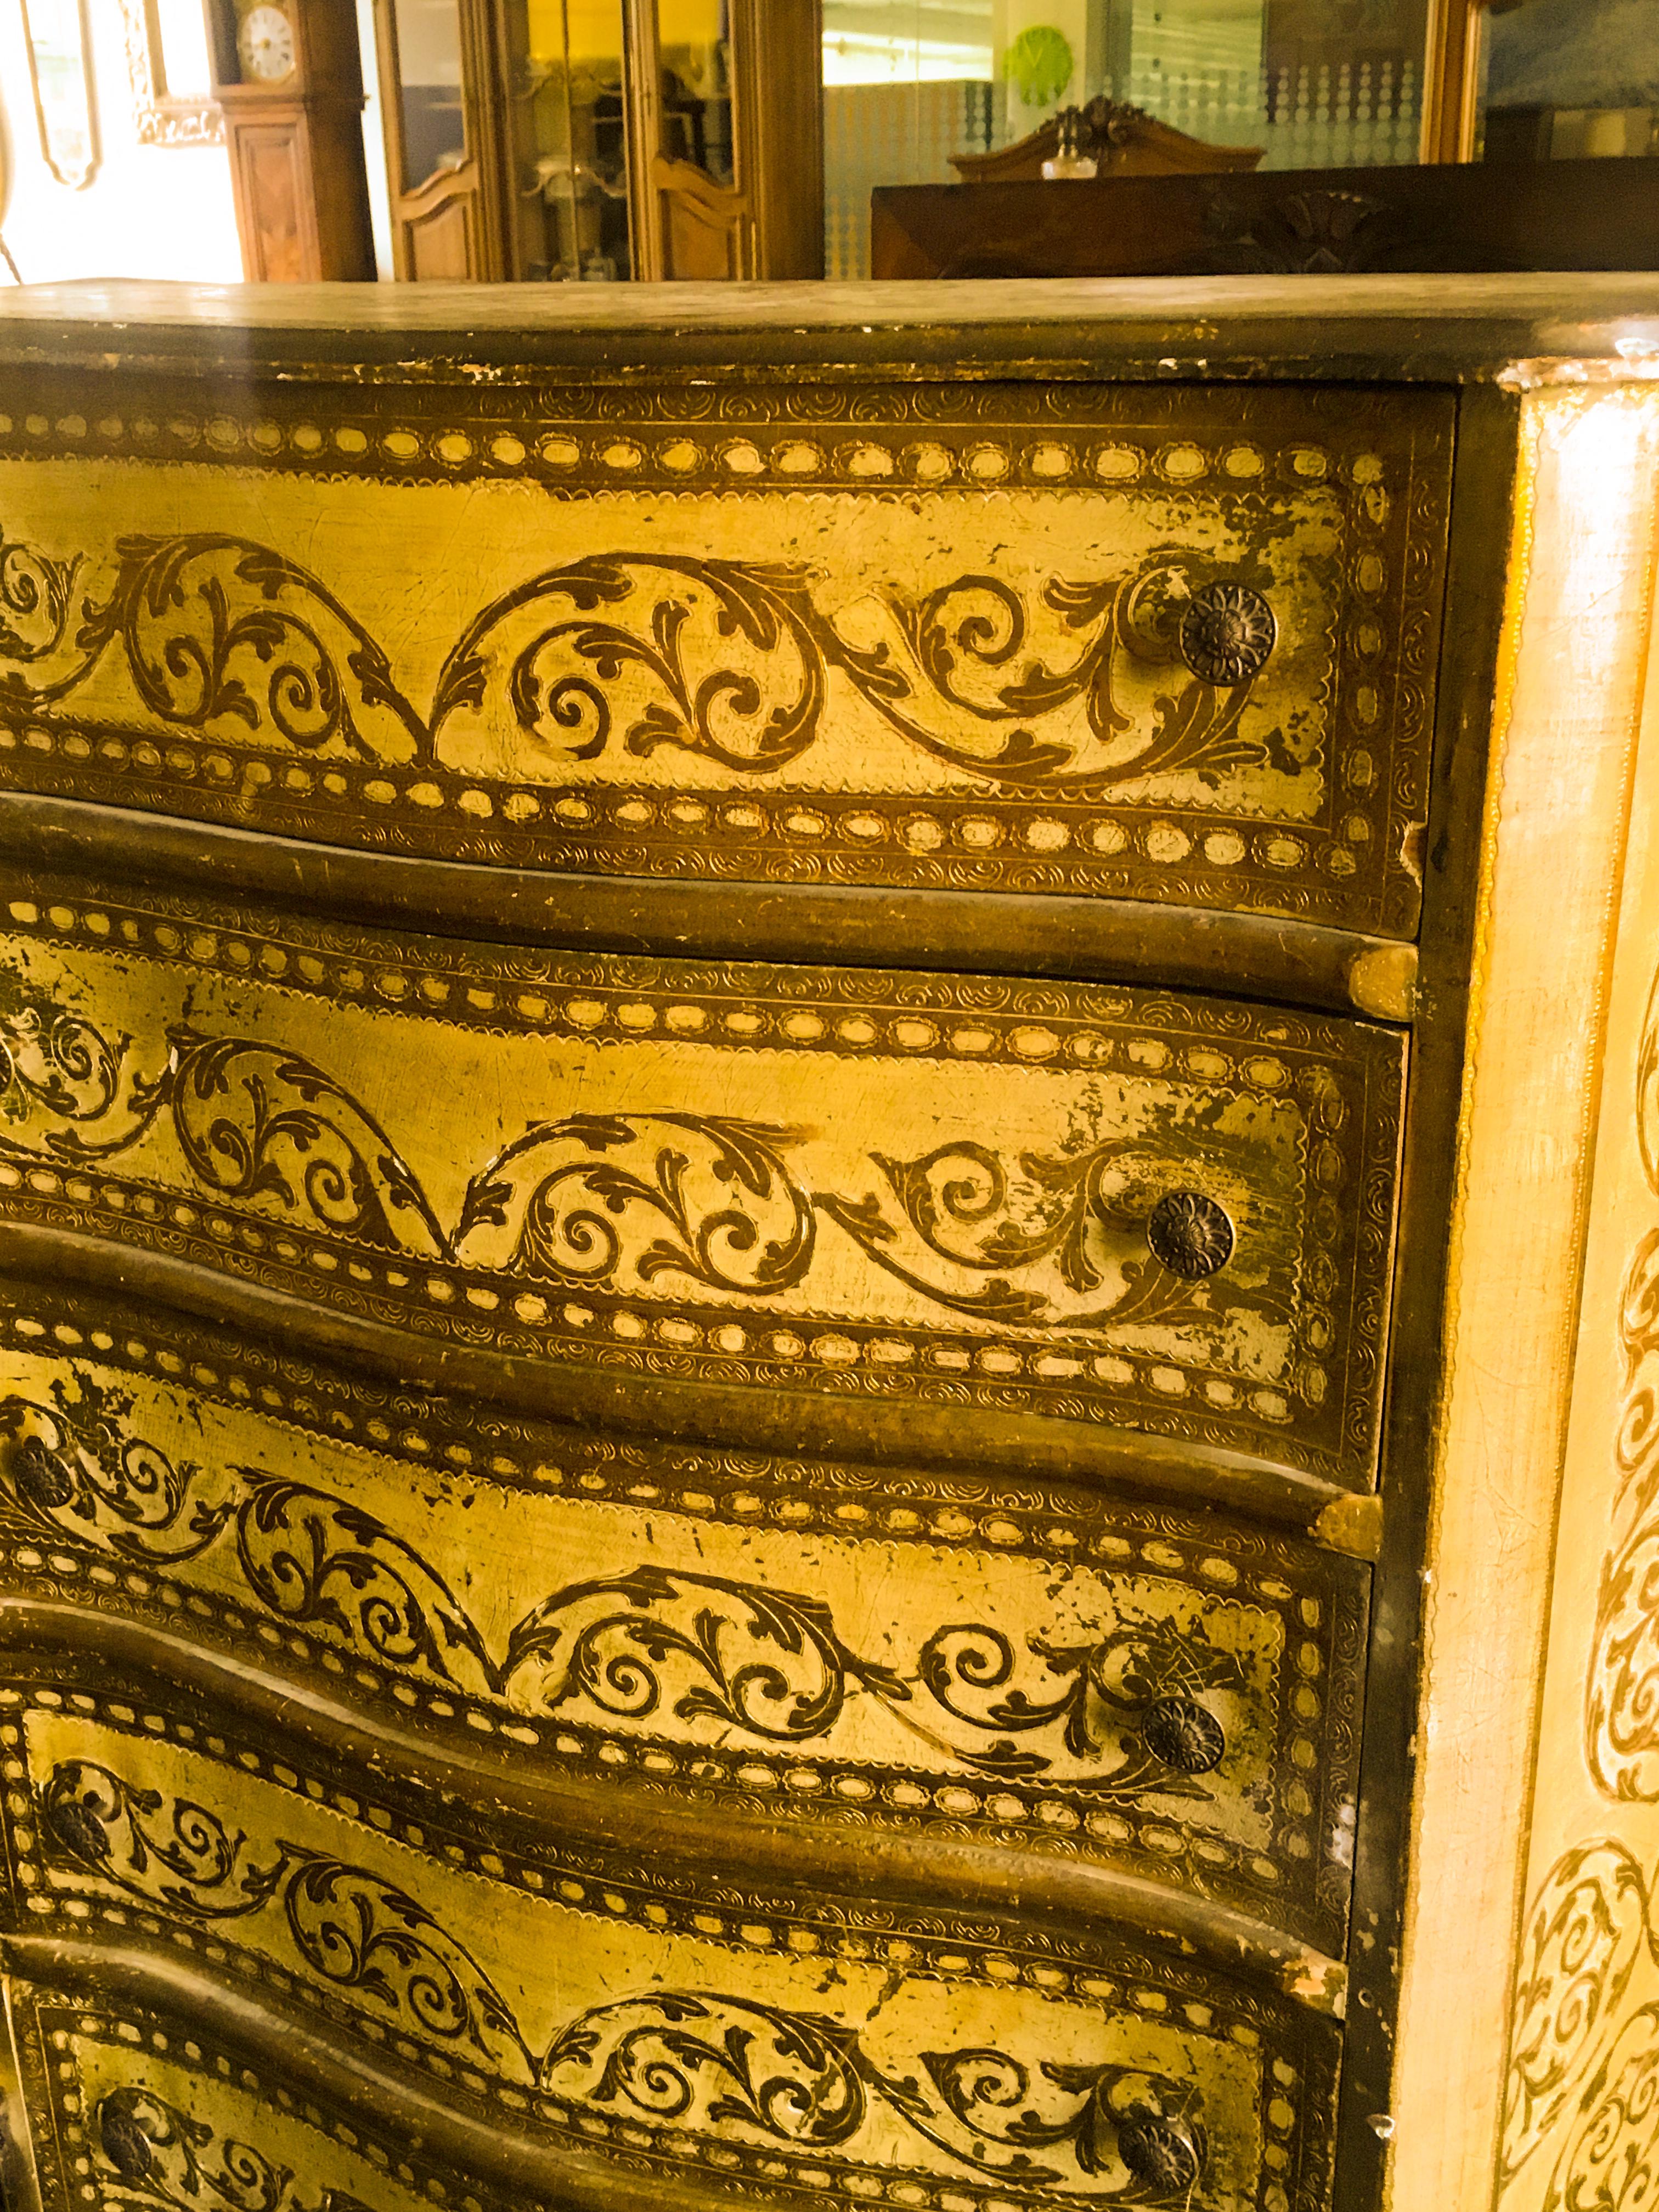 20th century Italian seminar curved on three sides in beige painted wood with gold details opening by seven drawers and resting on small curved feet in Louis XV style.
Italy, circa 1950.